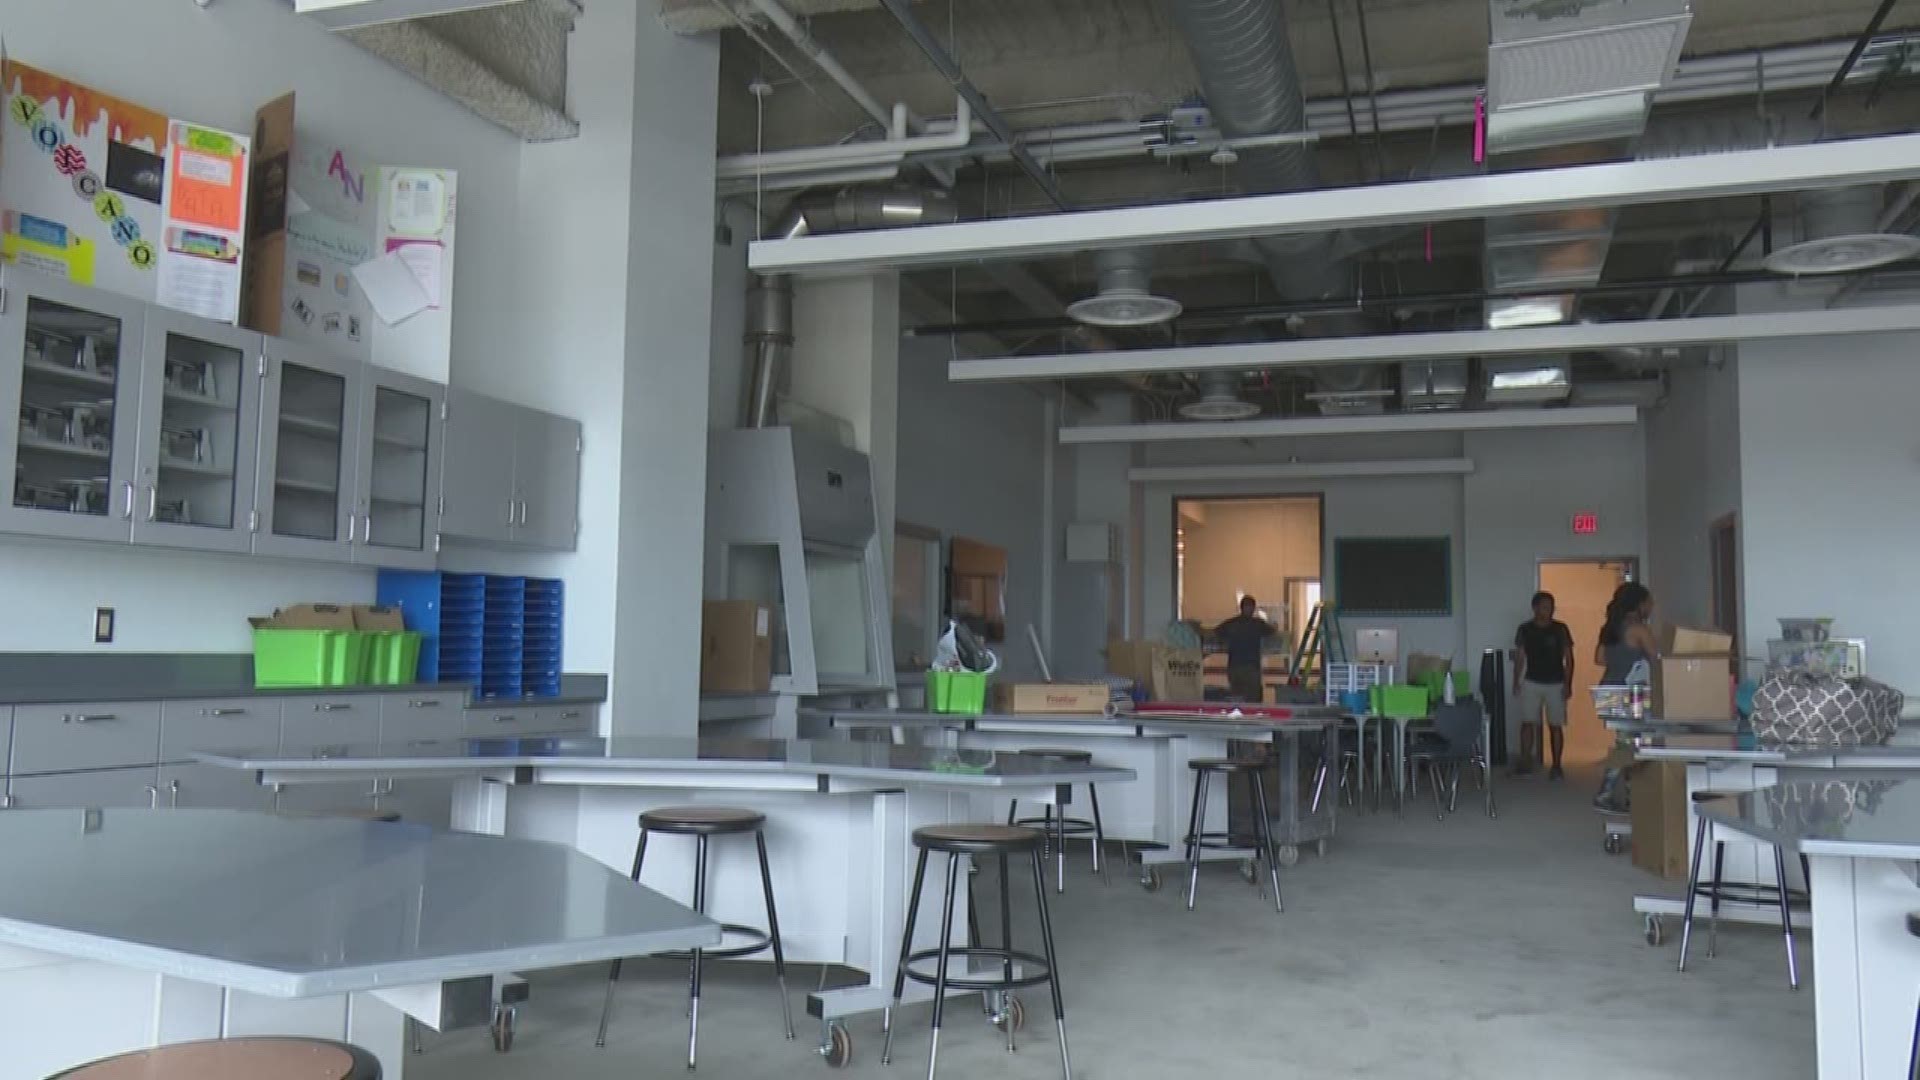 Non-traditional middle school opens in Keller